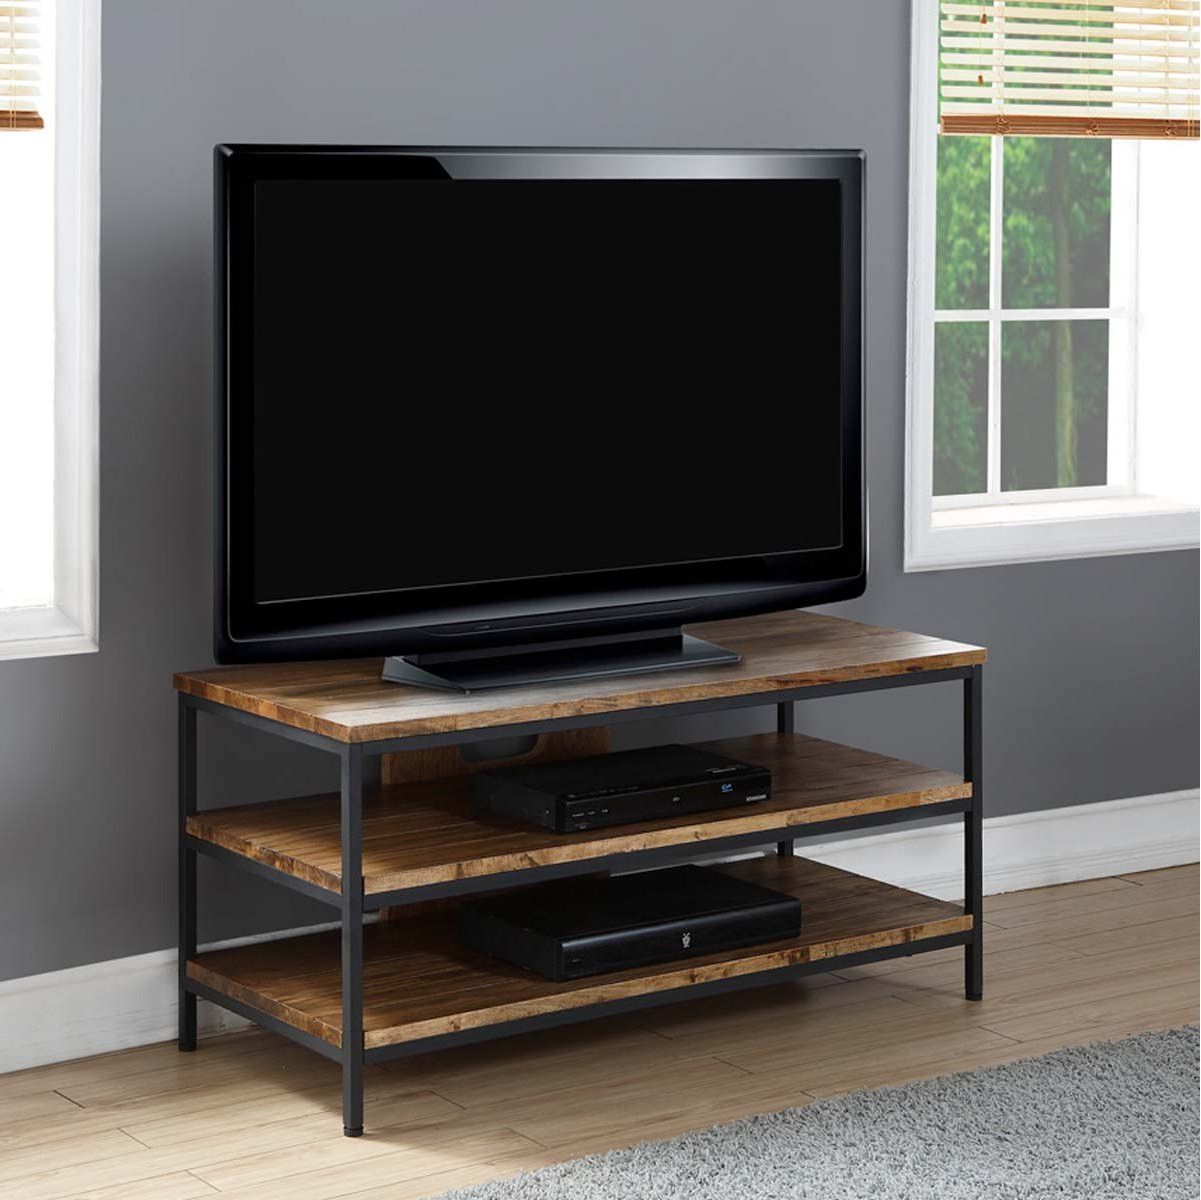 Solid Wood Oak Rustic Tv Stand Pertaining To Dillon Tv Stands Oak (Gallery 4 of 20)